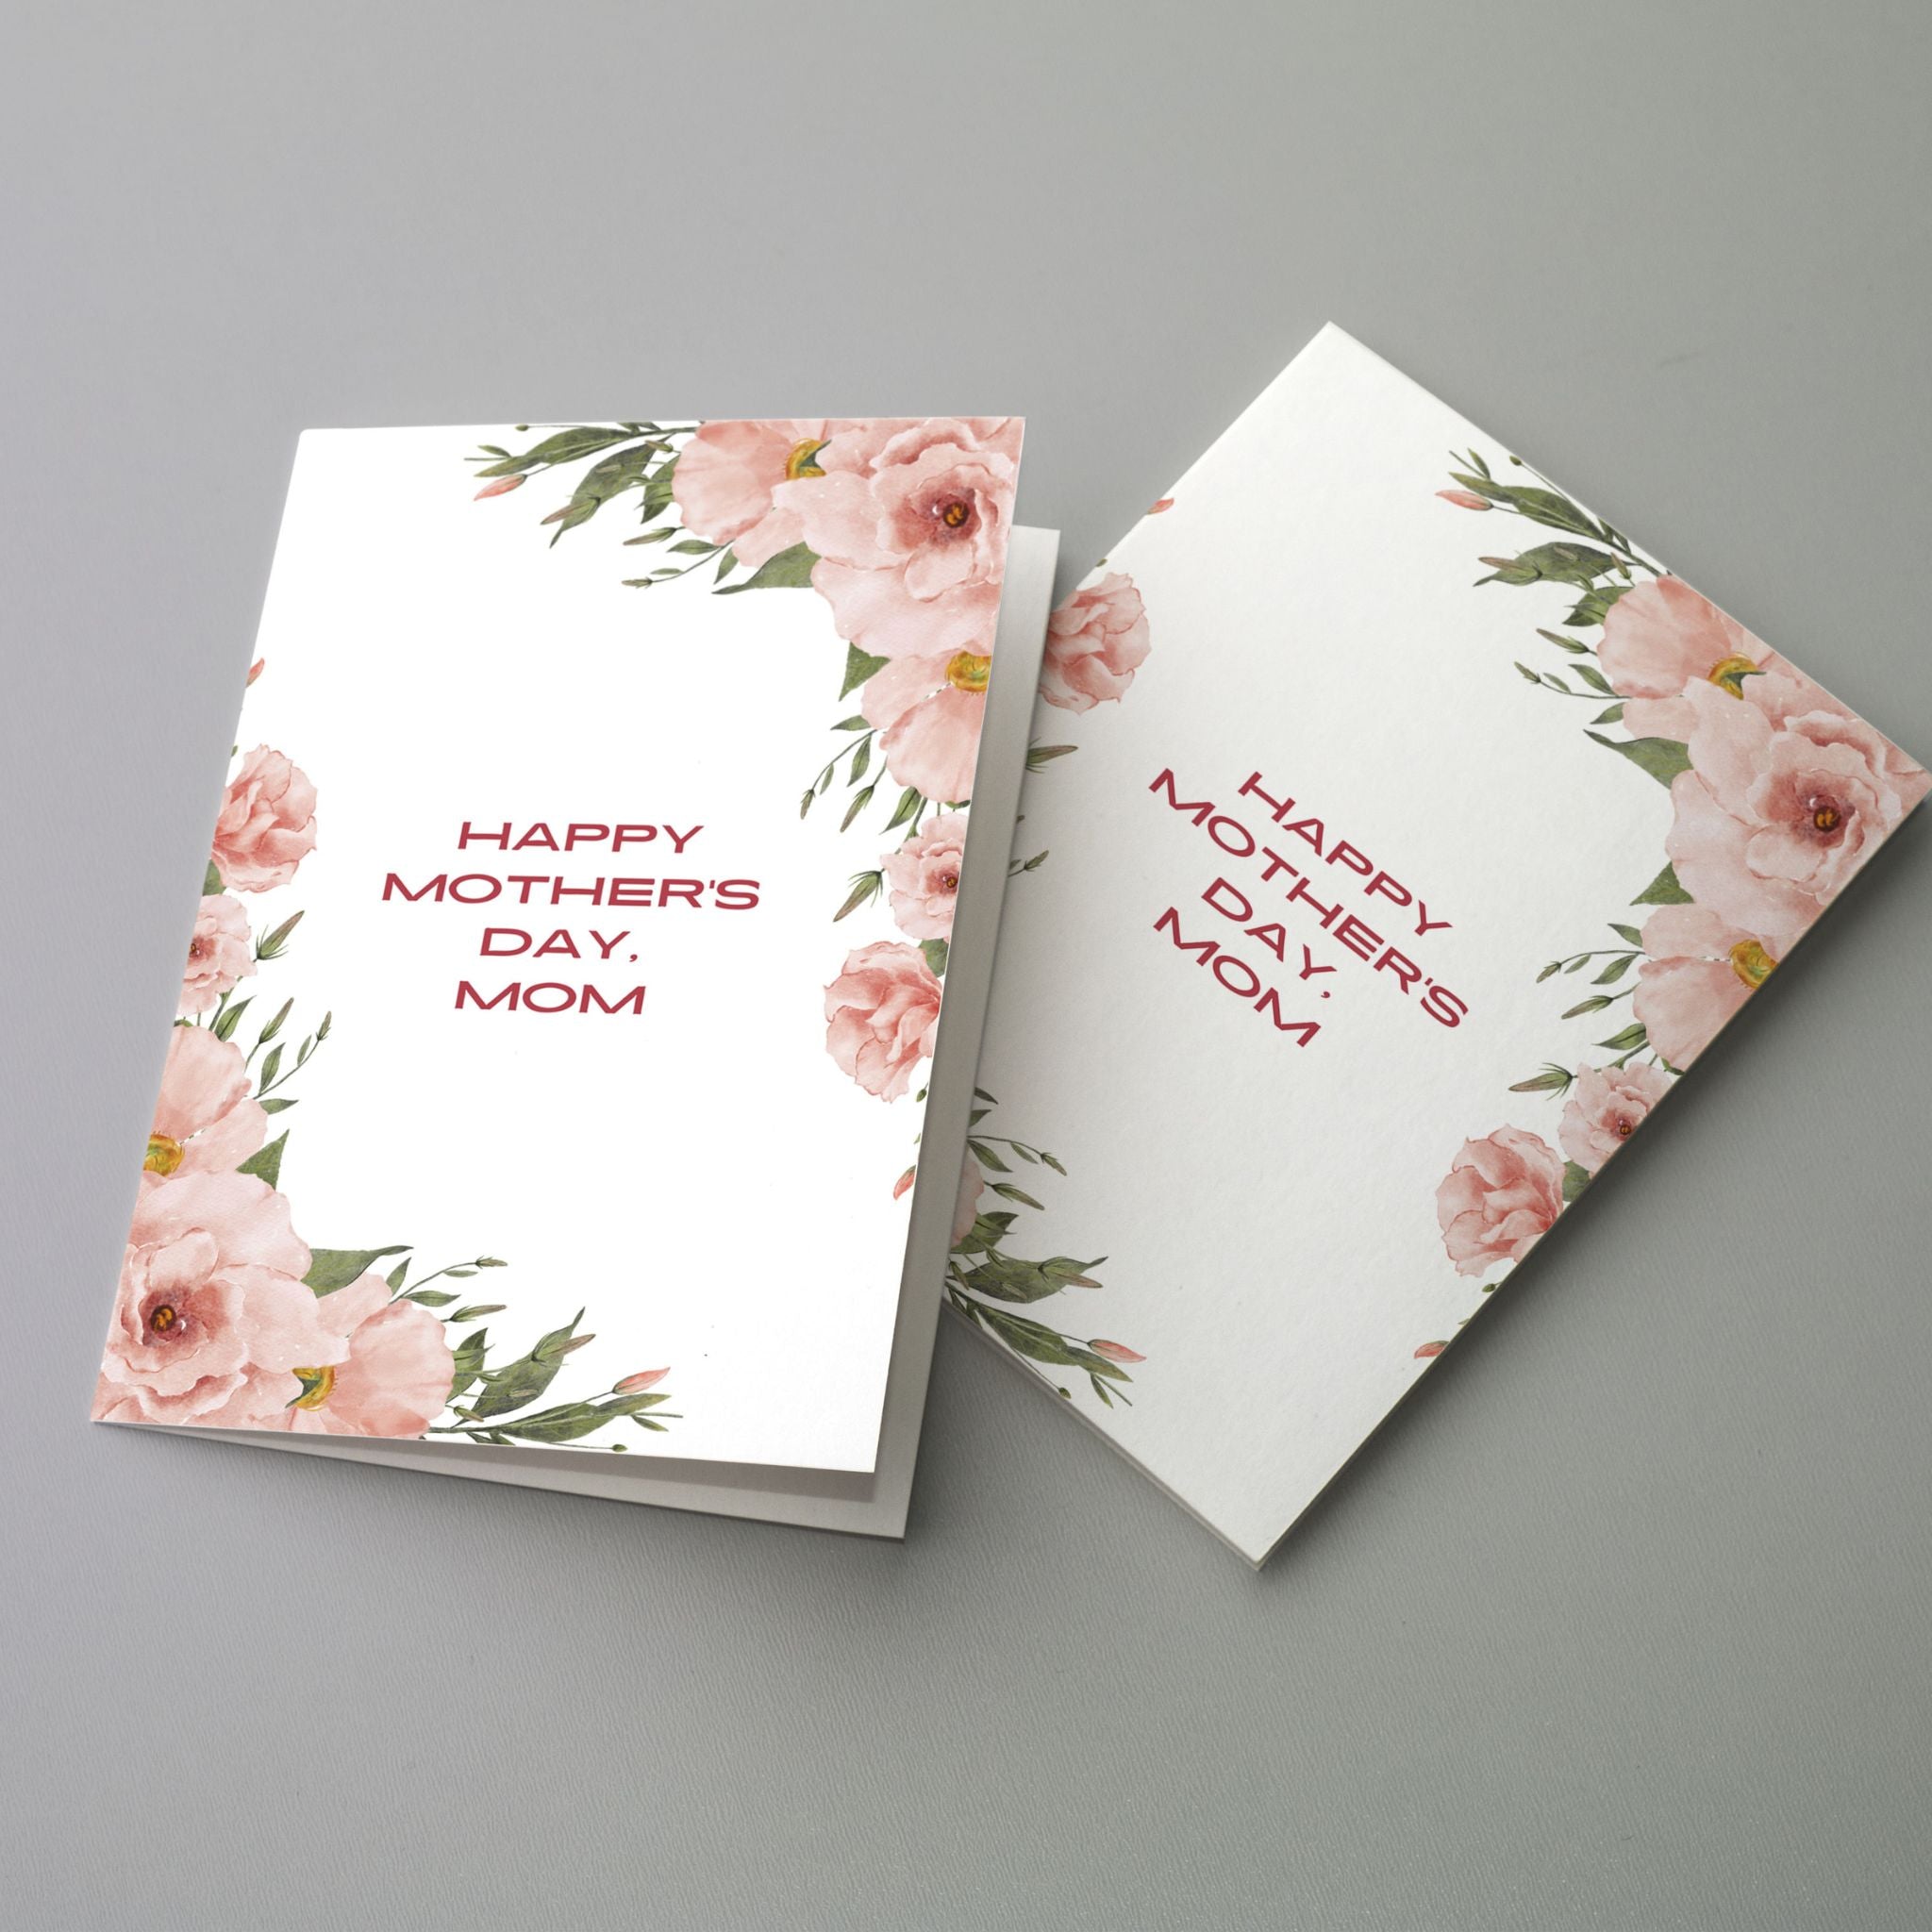 Greeting Cards for All Occassions